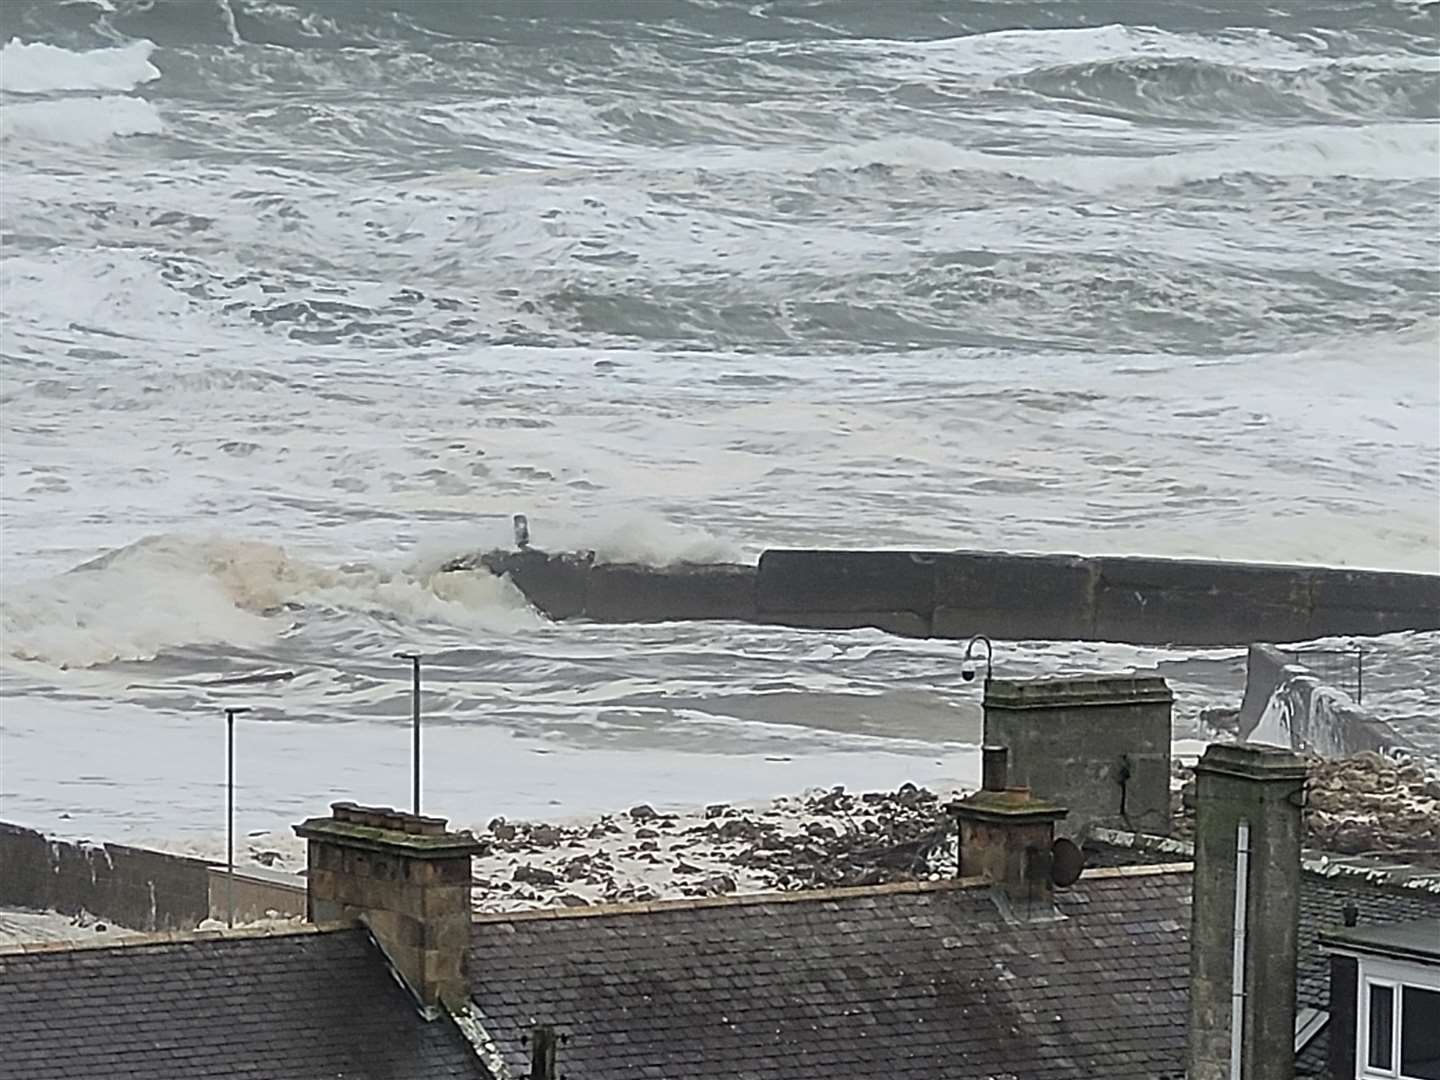 A wild and frothy Lossiemouth as captured by Northern Scot reader Hazel Thomson.